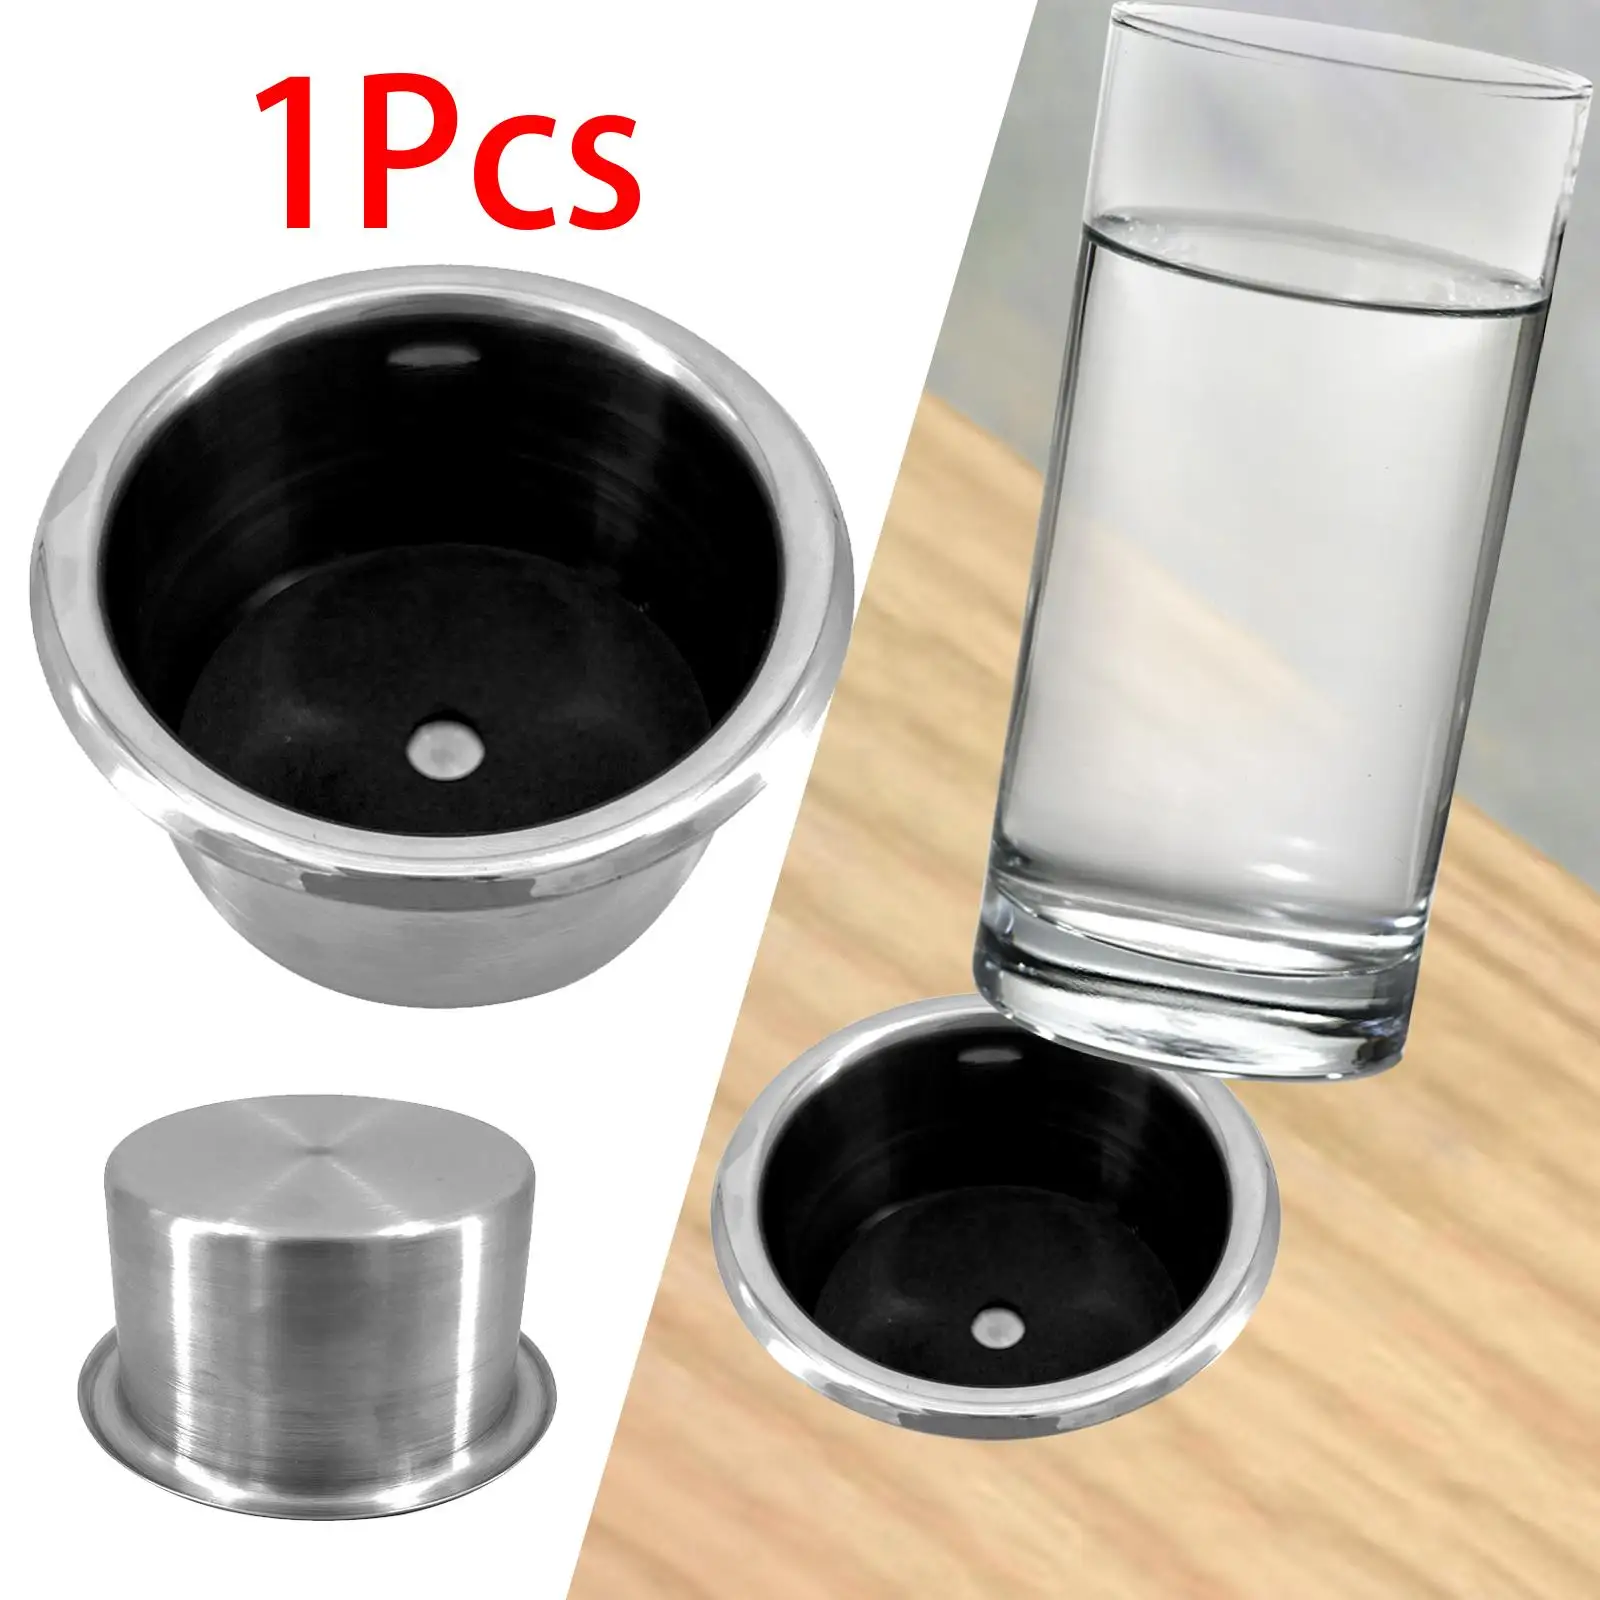 Cup Drink Holder Insert with Drain Sturdy Portable Accessories Smooth Surface Universal for Truck Marine Boat Camper Car